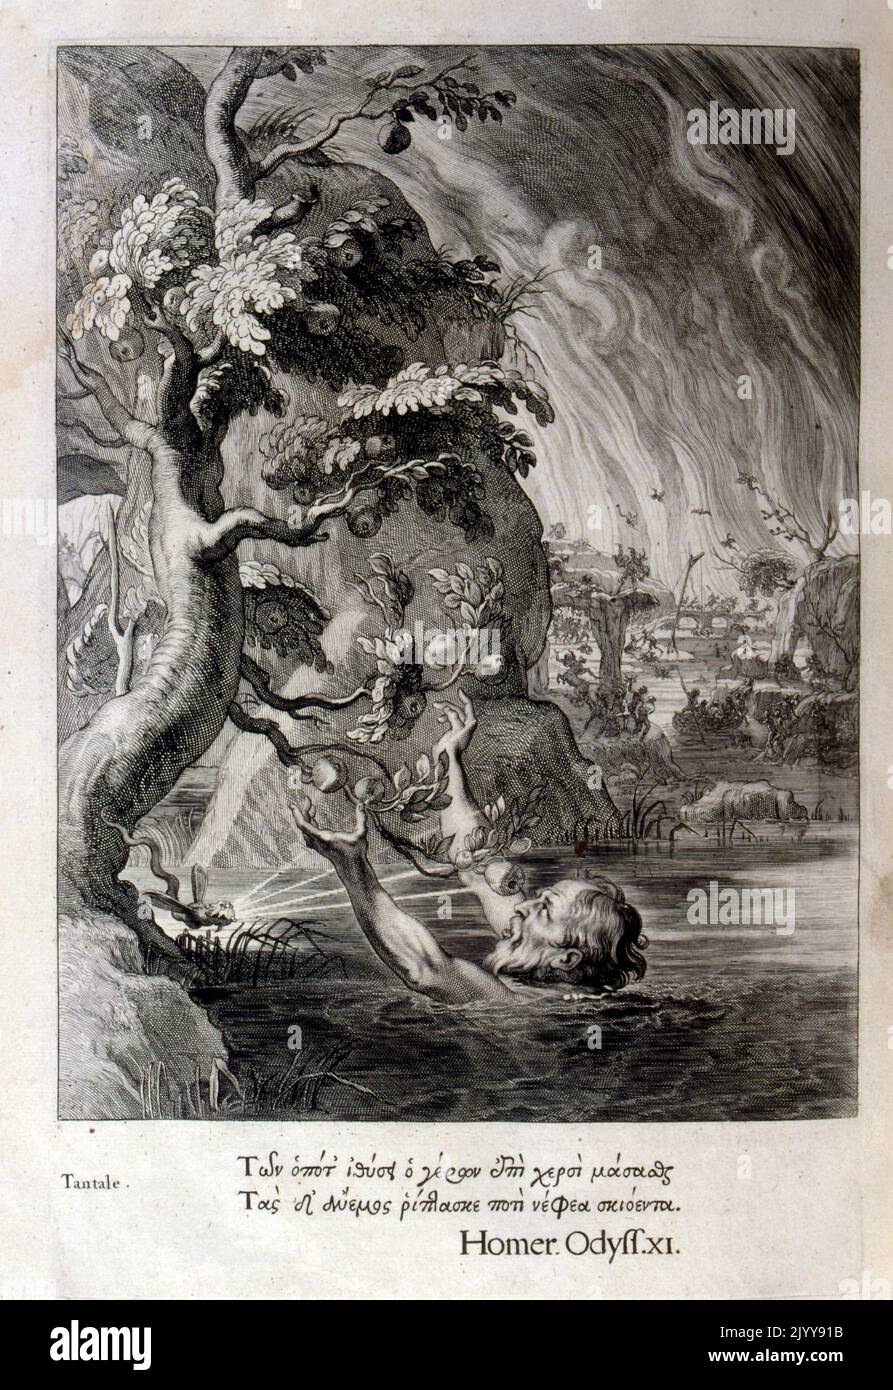 Black and white engraving Illustration from an edition of Homer's Odyssey. A man is in water reaching up for fruit growing on a tree. Stock Photo